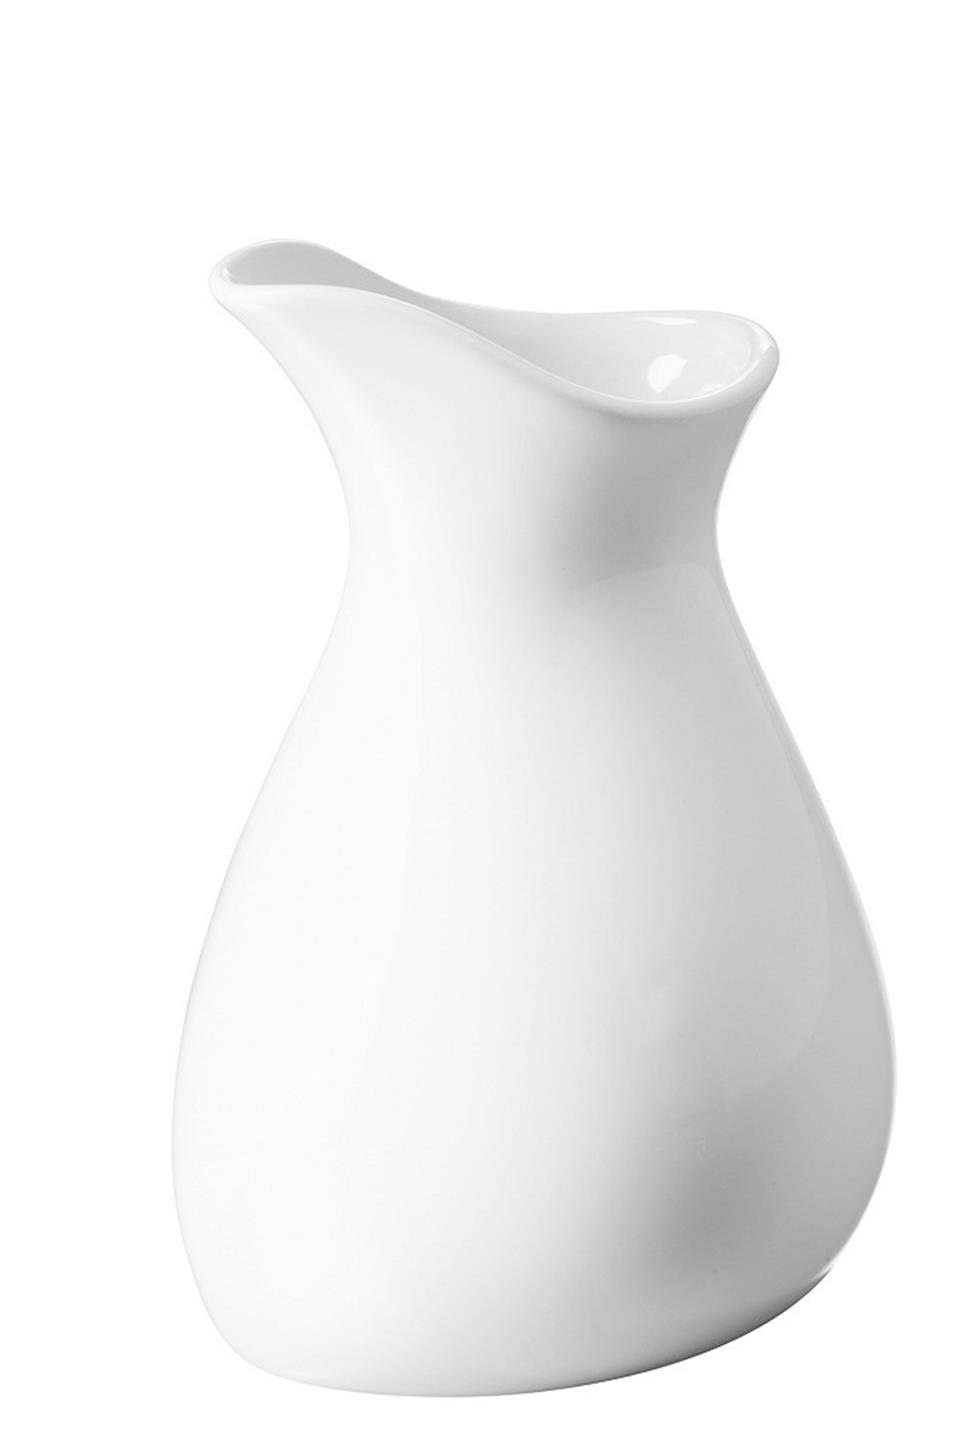 LIKID WHITE POURING JUG 13CM 25CL